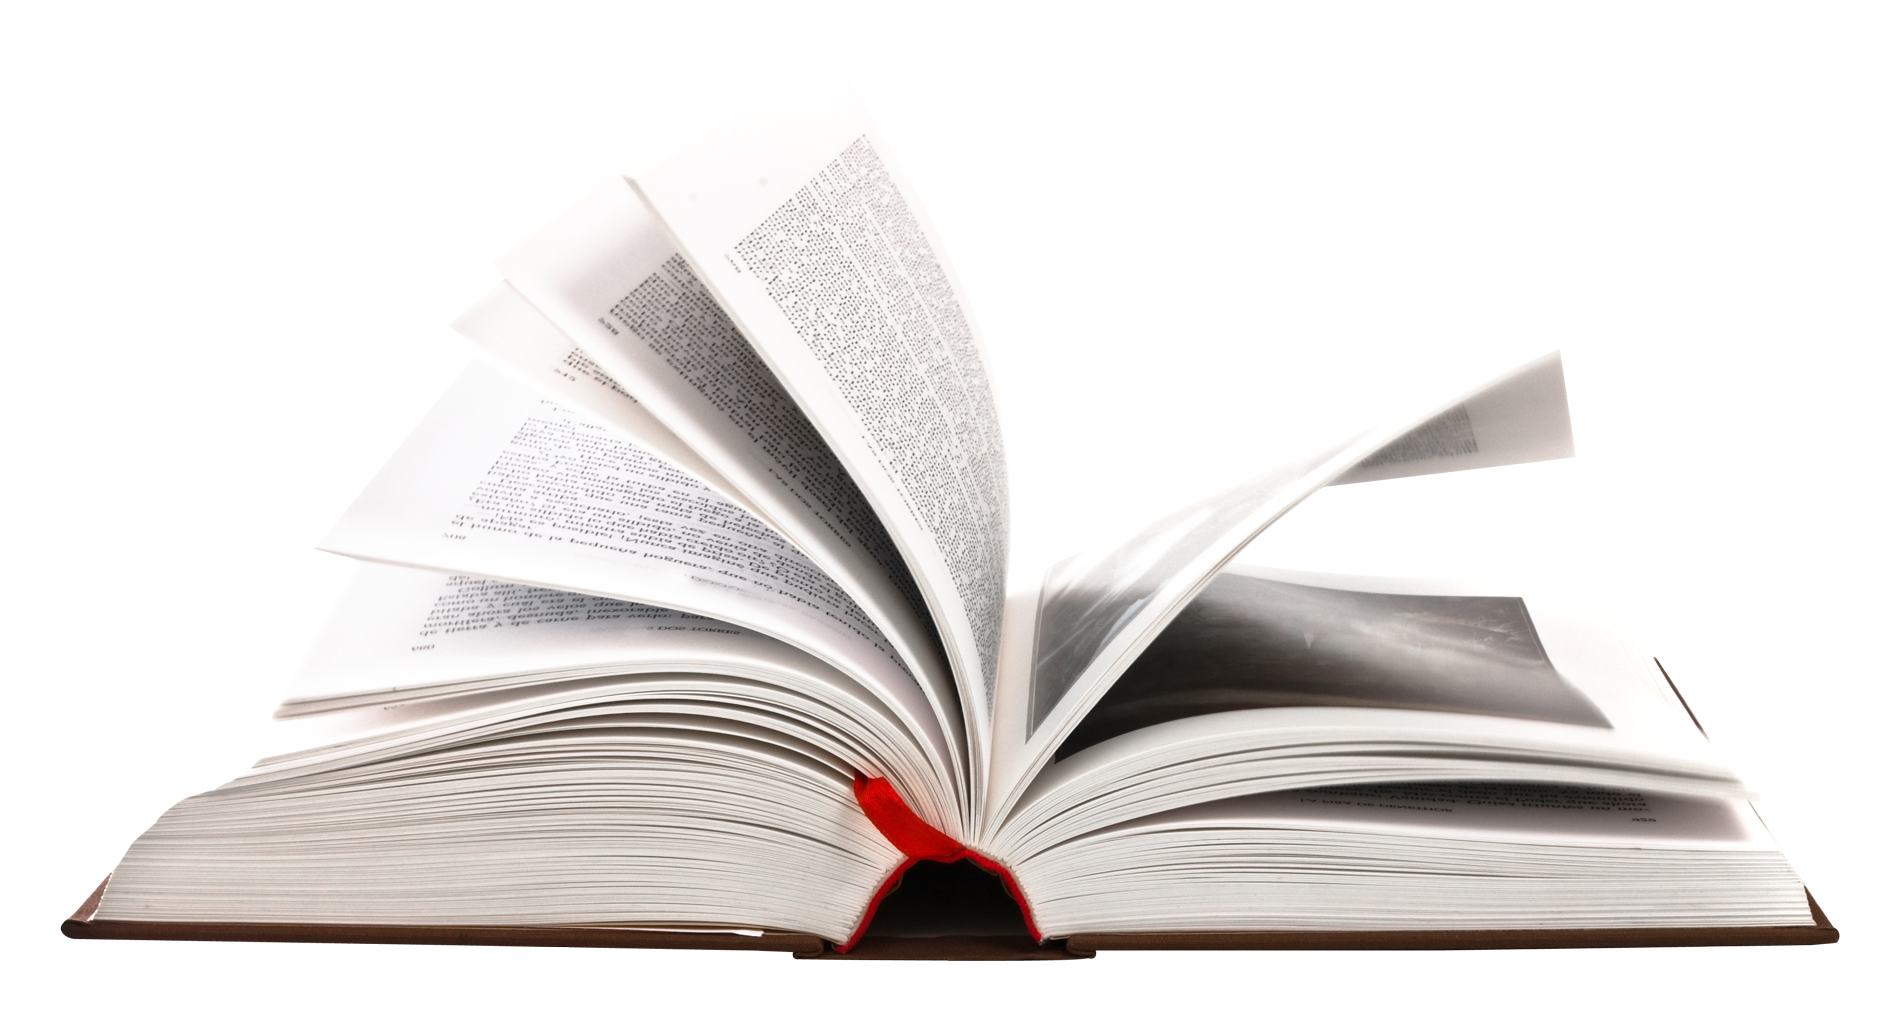 opened book image transparent png #41621